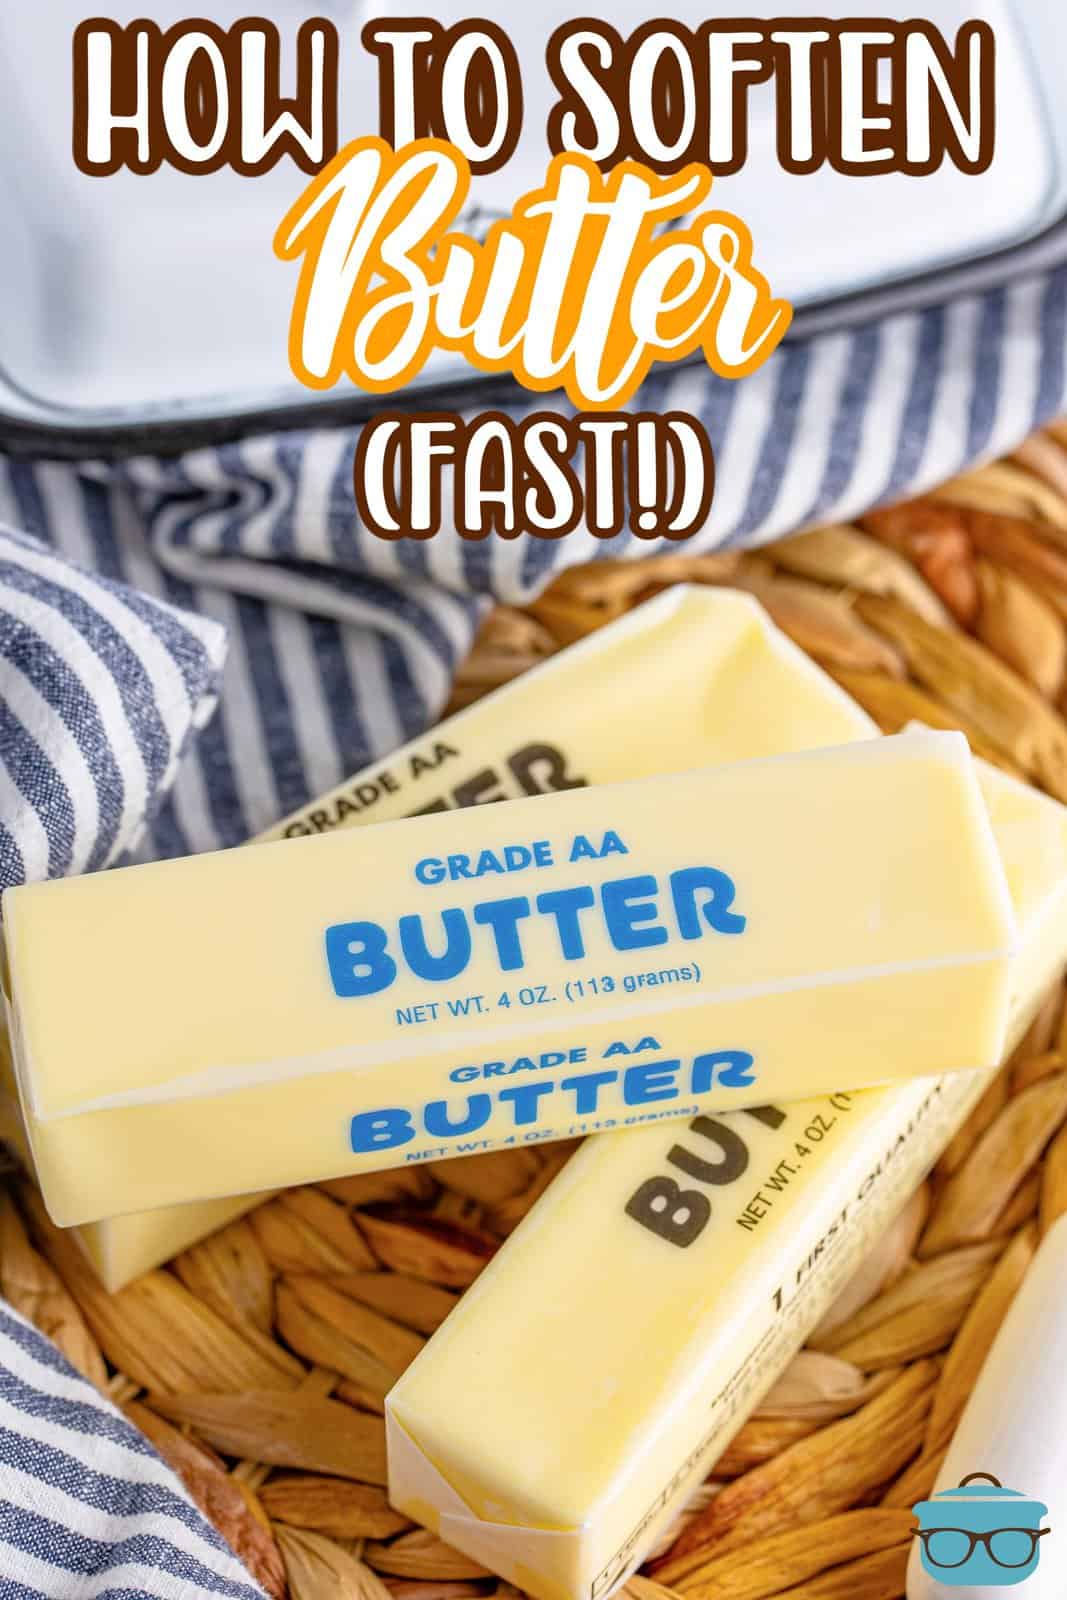 A few sticks of softened butter in a pile.